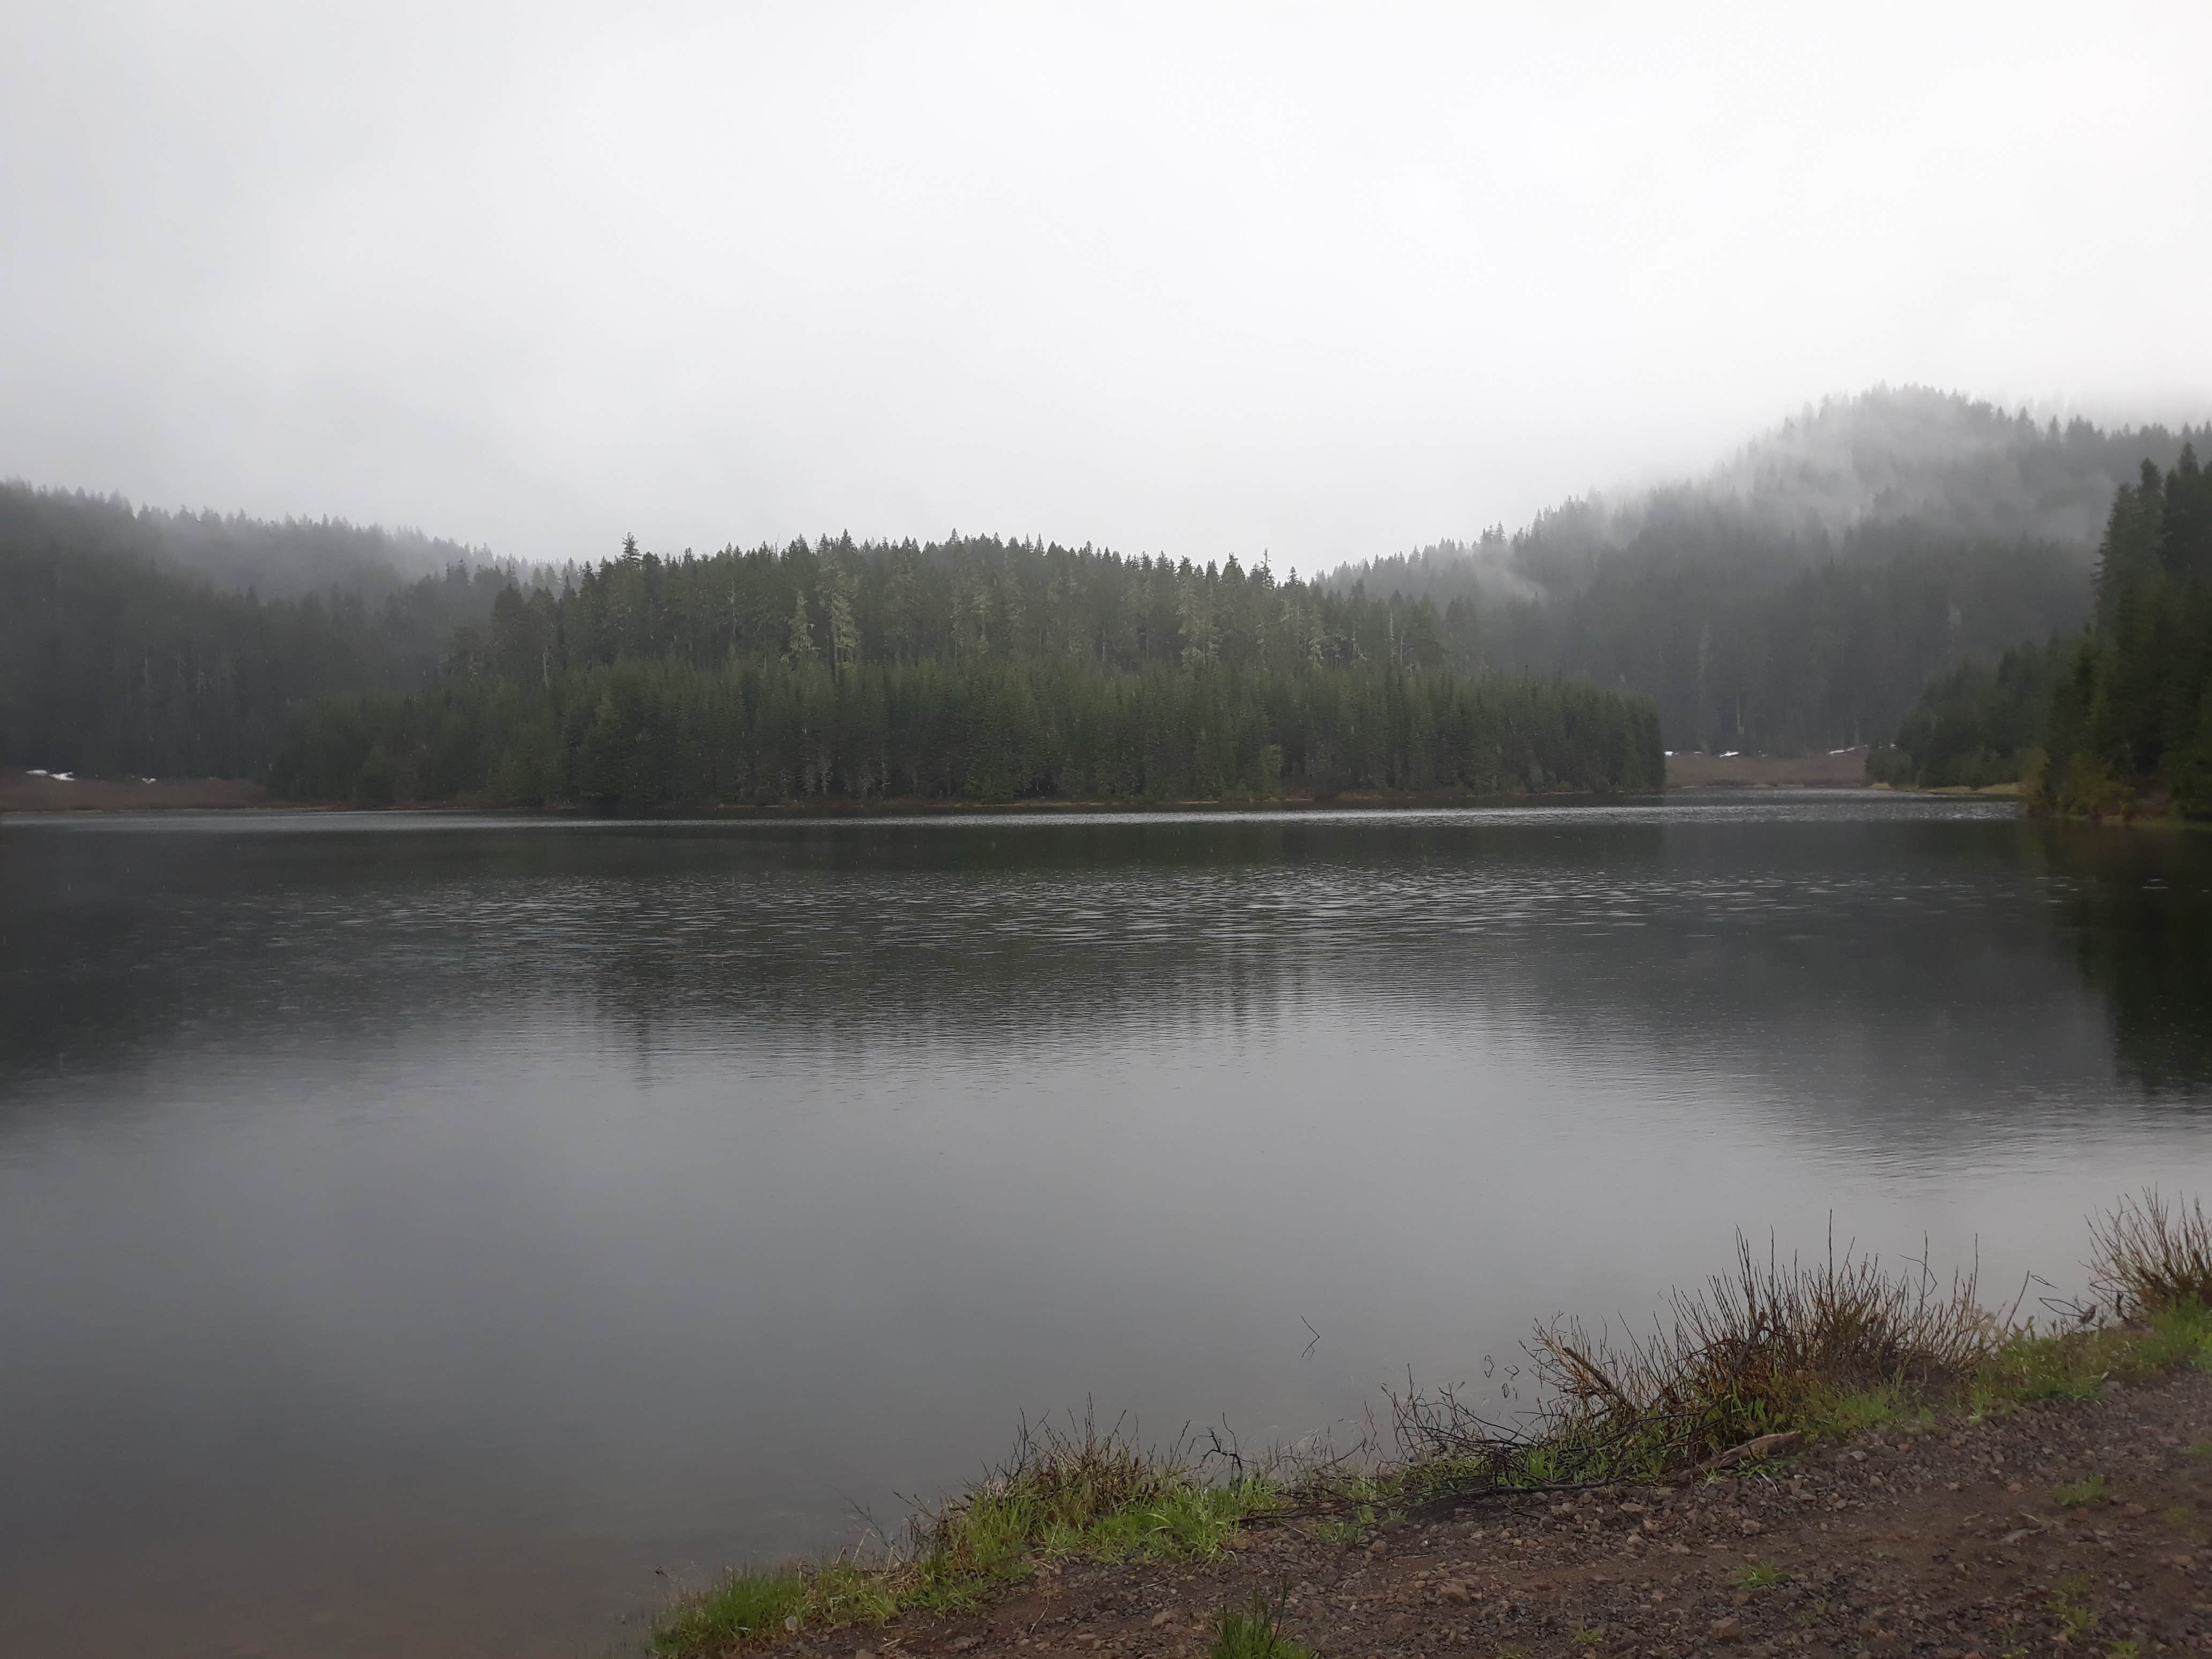 Camper submitted image from Hemlock Lake - 2